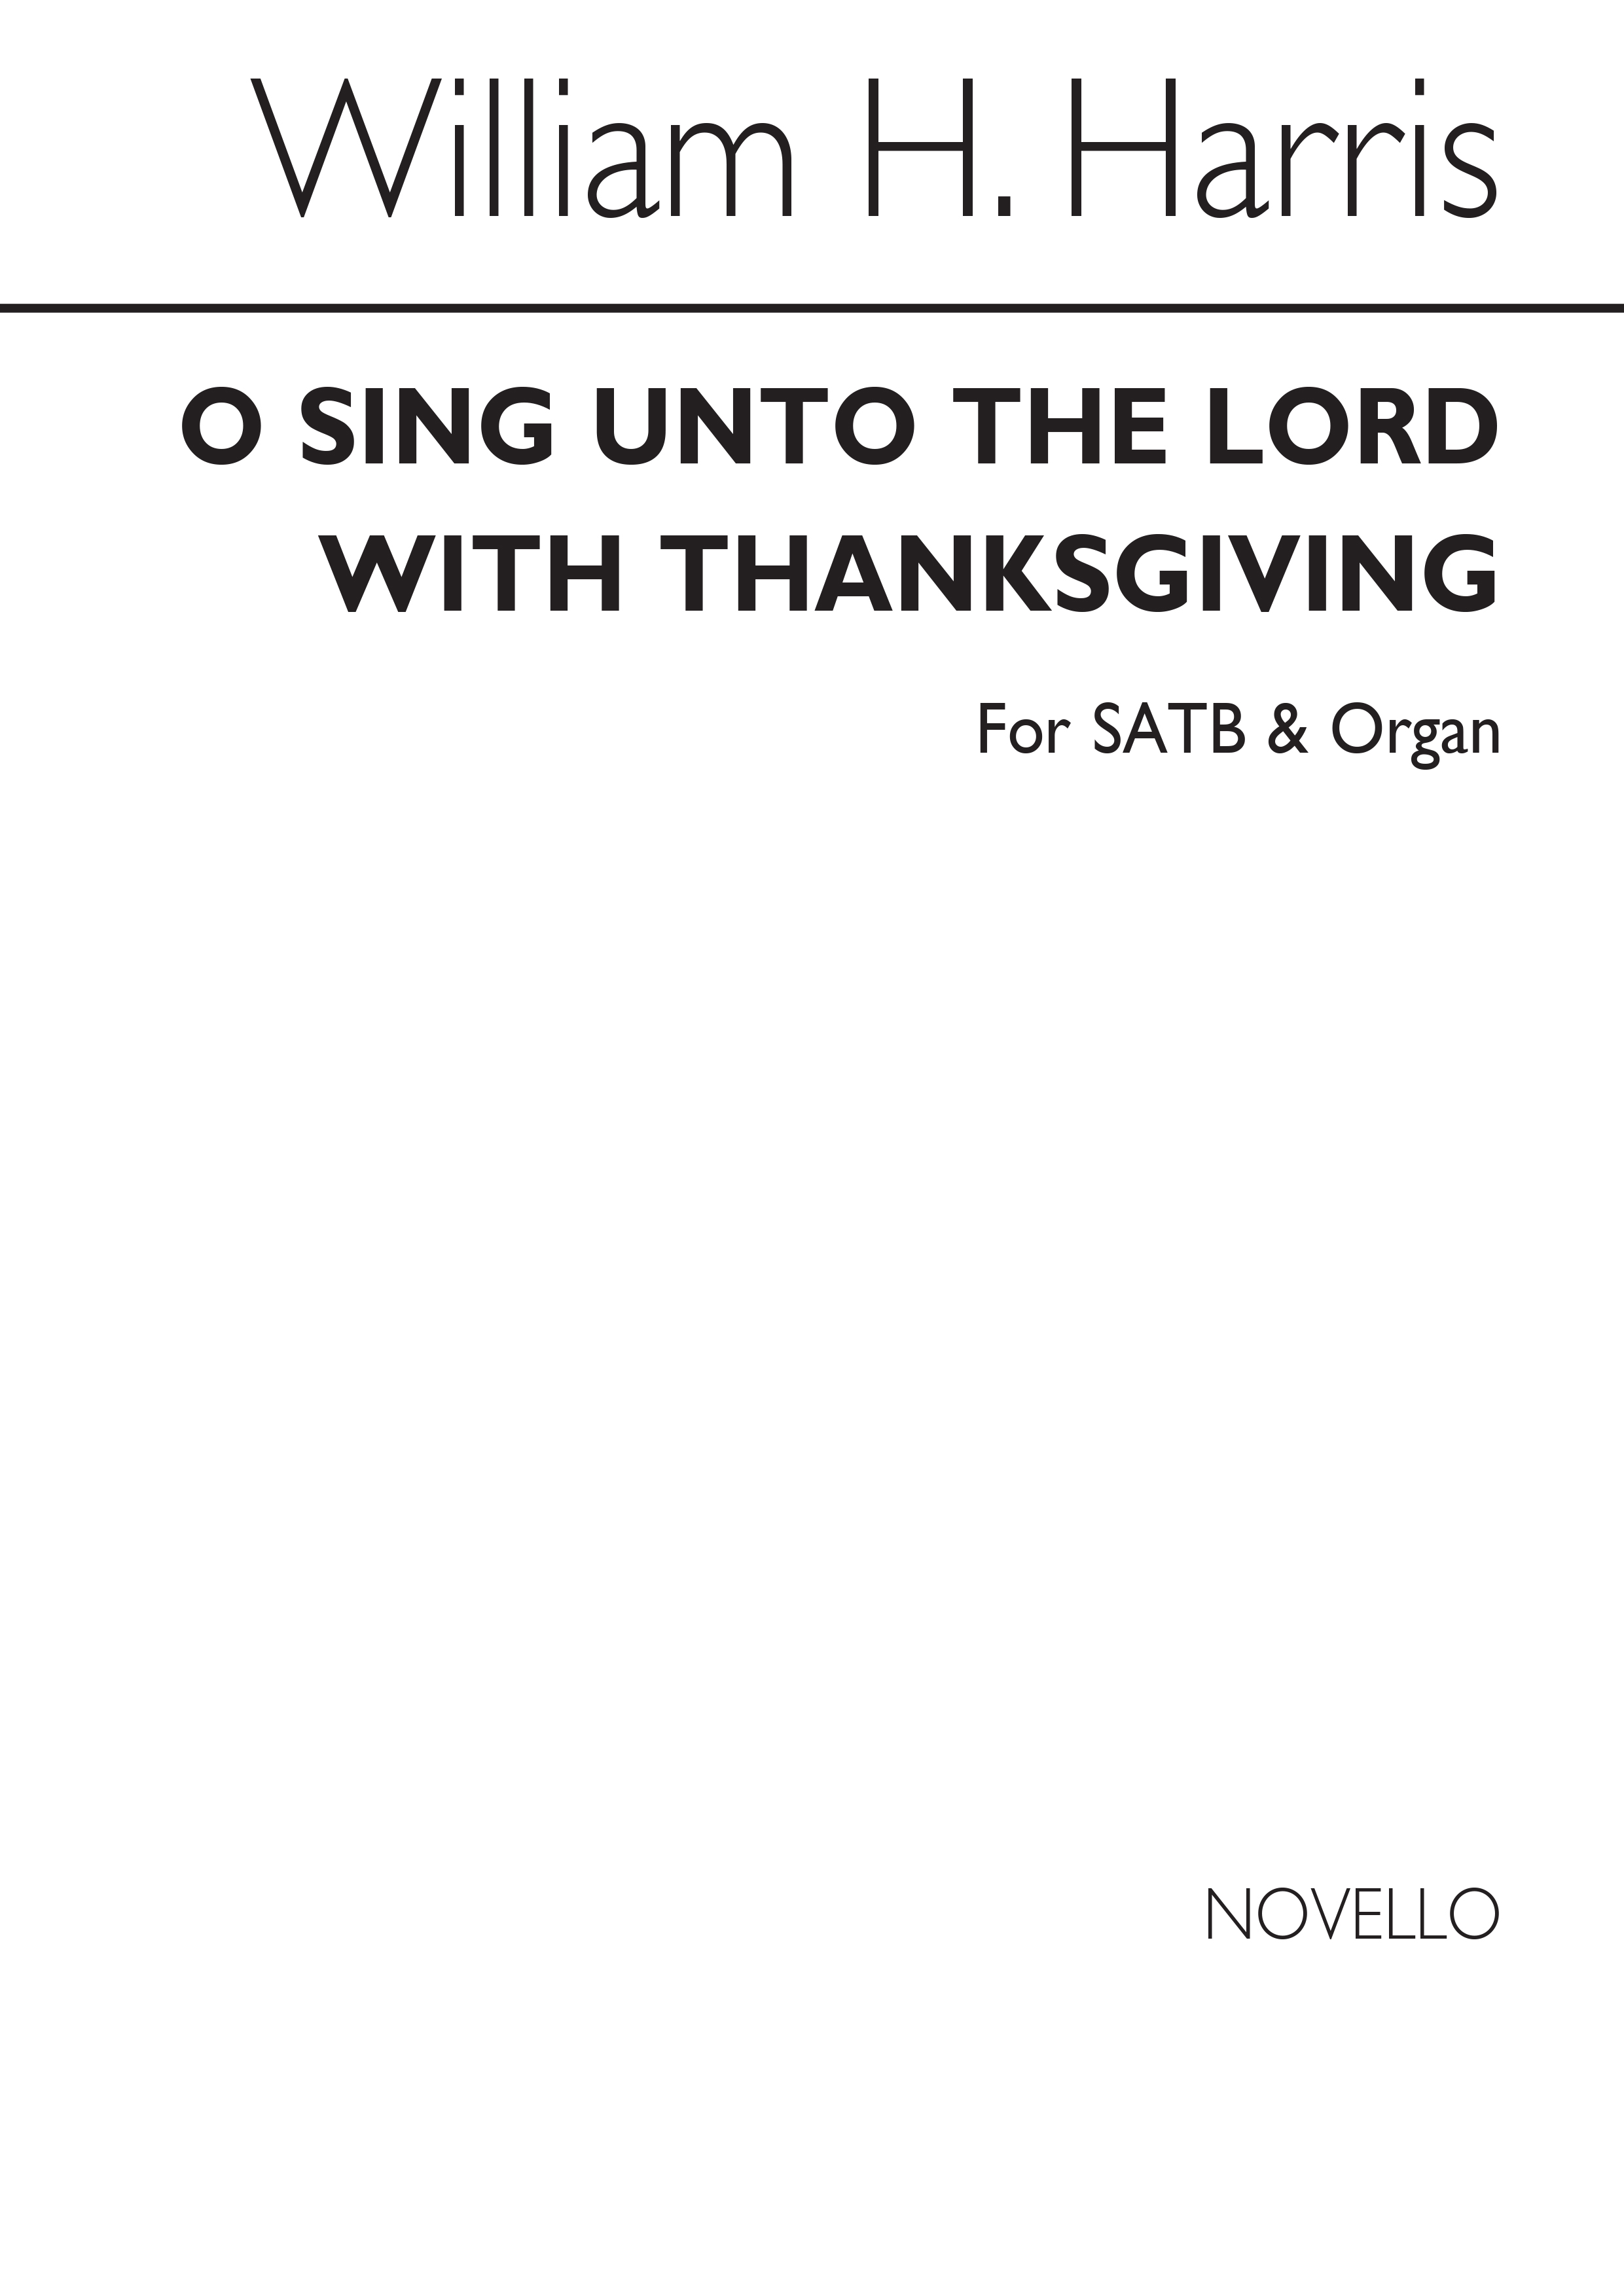 William H. Harris: O Sing Unto The Lord